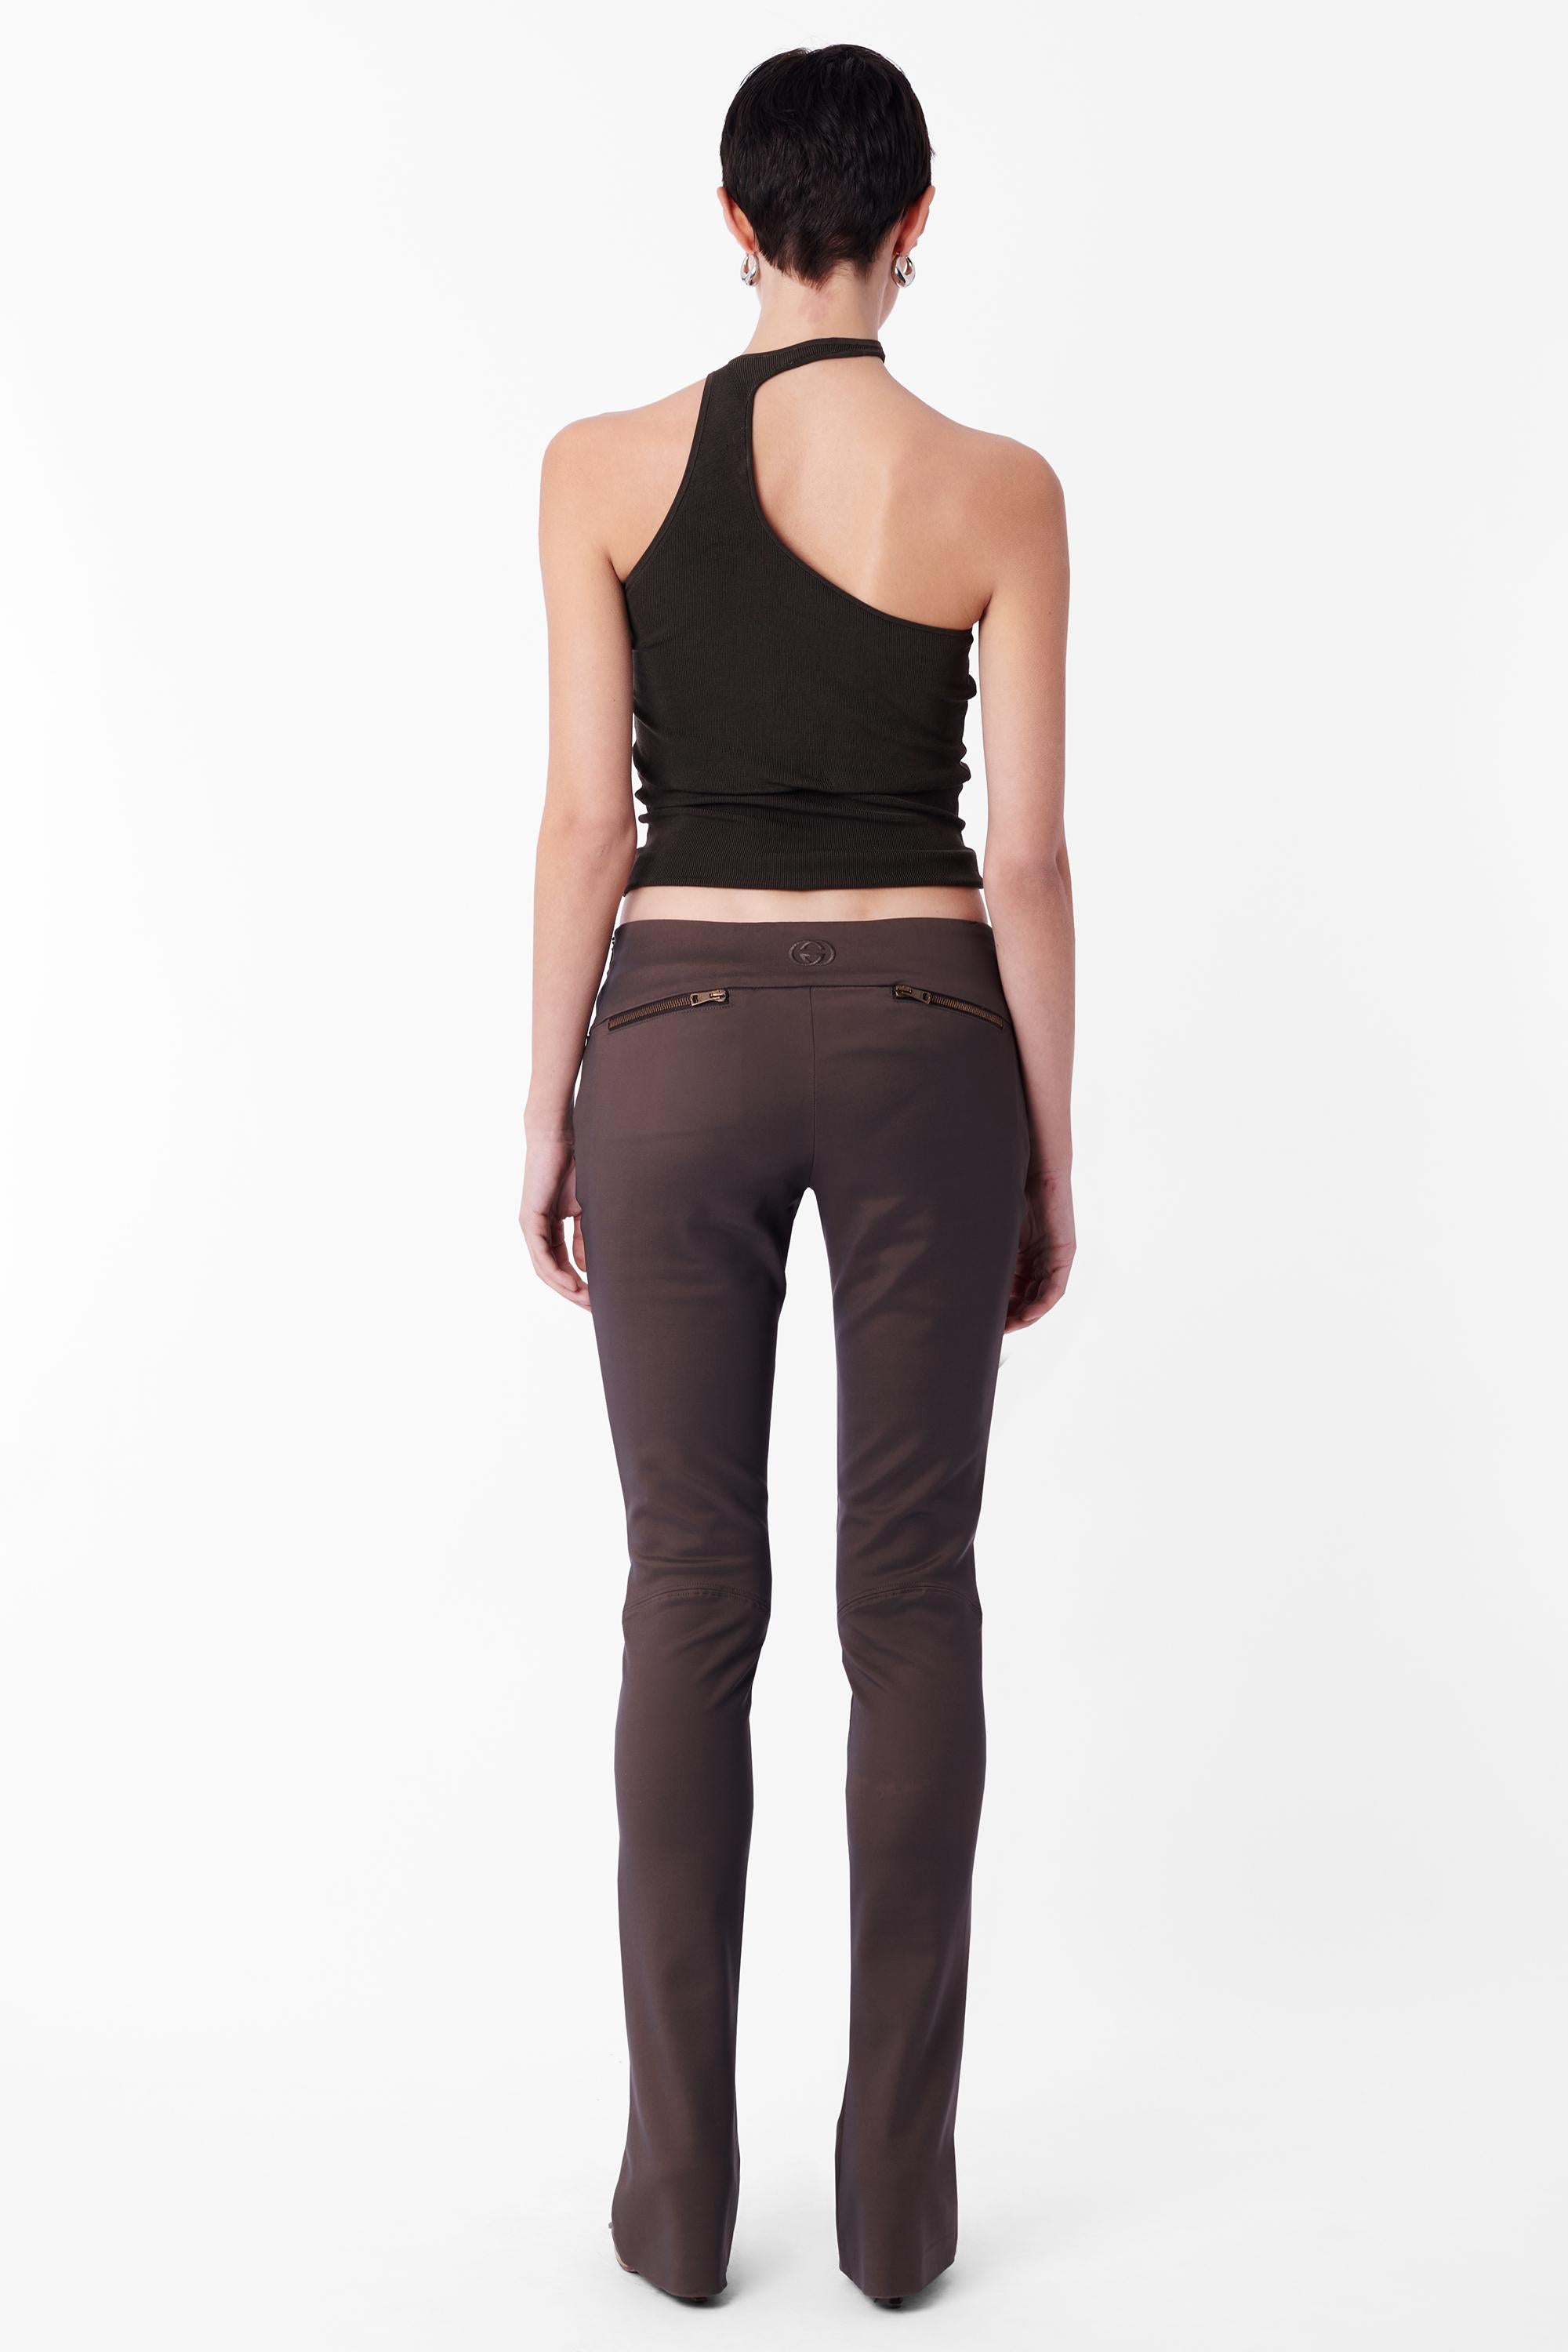 Tom Ford for Gucci Fall Winter 2003 low waisted brown trousers. Features cross-over v-front, double flat front hip pockets with zips, bootcut leg, double zip back pockets, embossed Gucci GG in black in centre back and invisible zip side closure. In